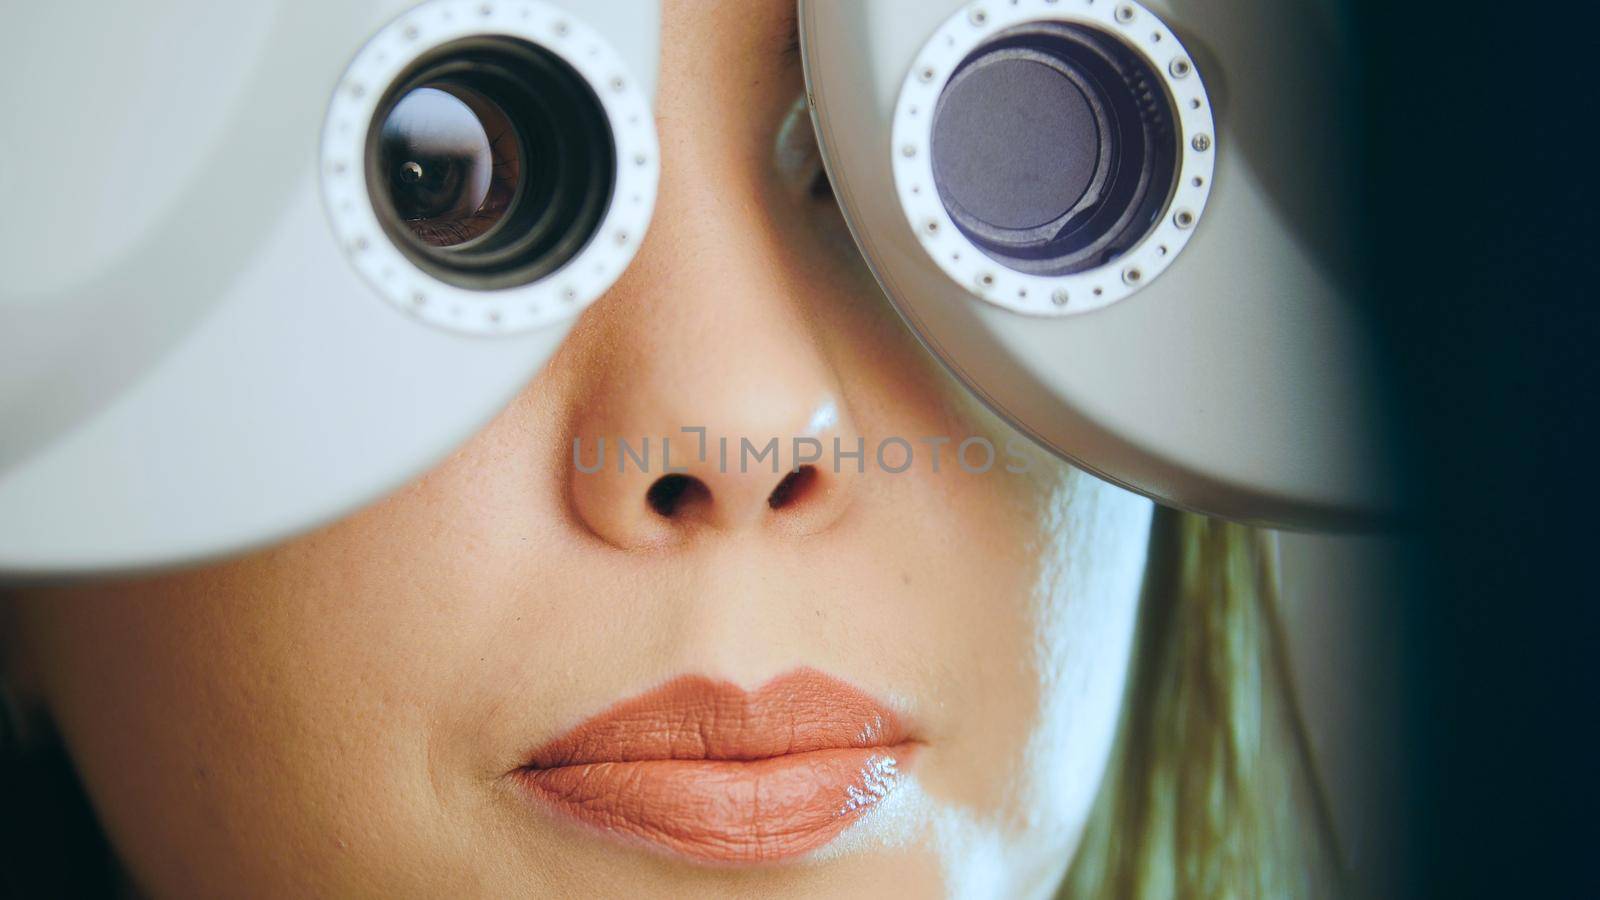 Ophthalmology concept - young woman checks the eyes on the modern equipment in the medical center by Studia72